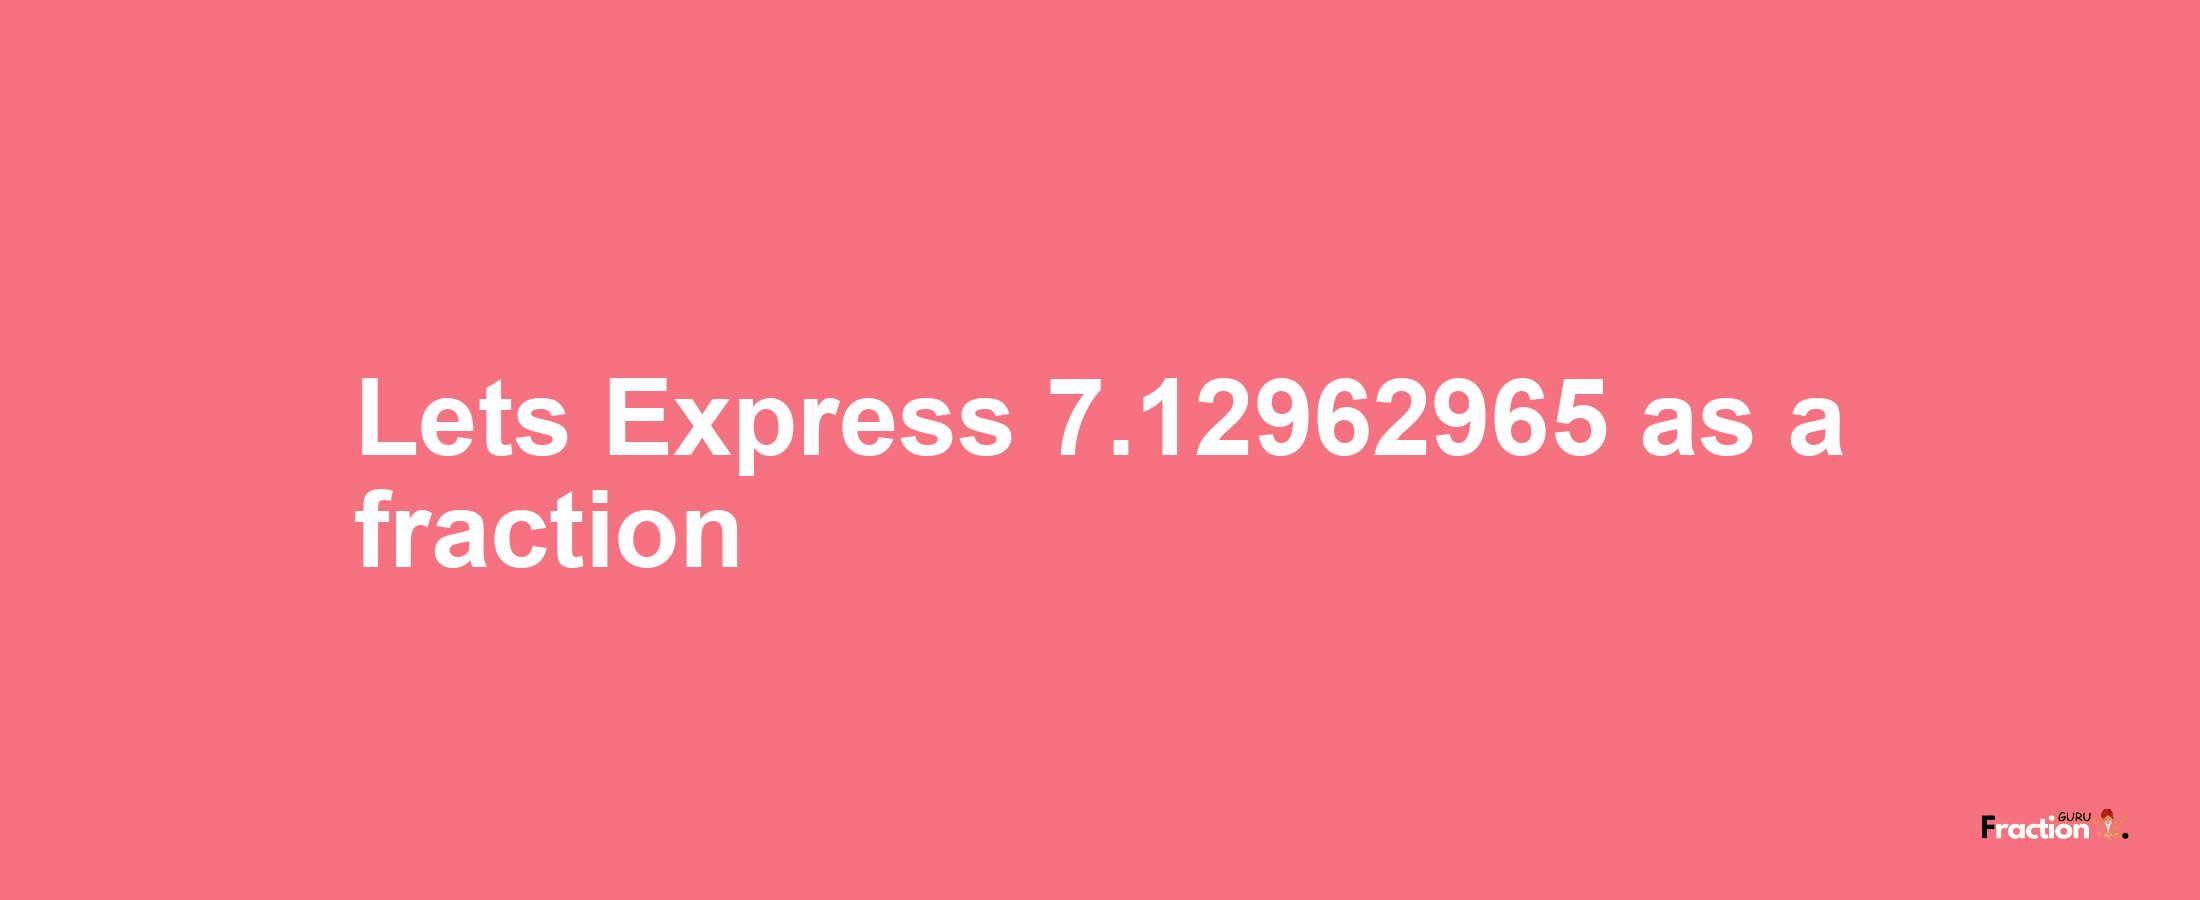 Lets Express 7.12962965 as afraction